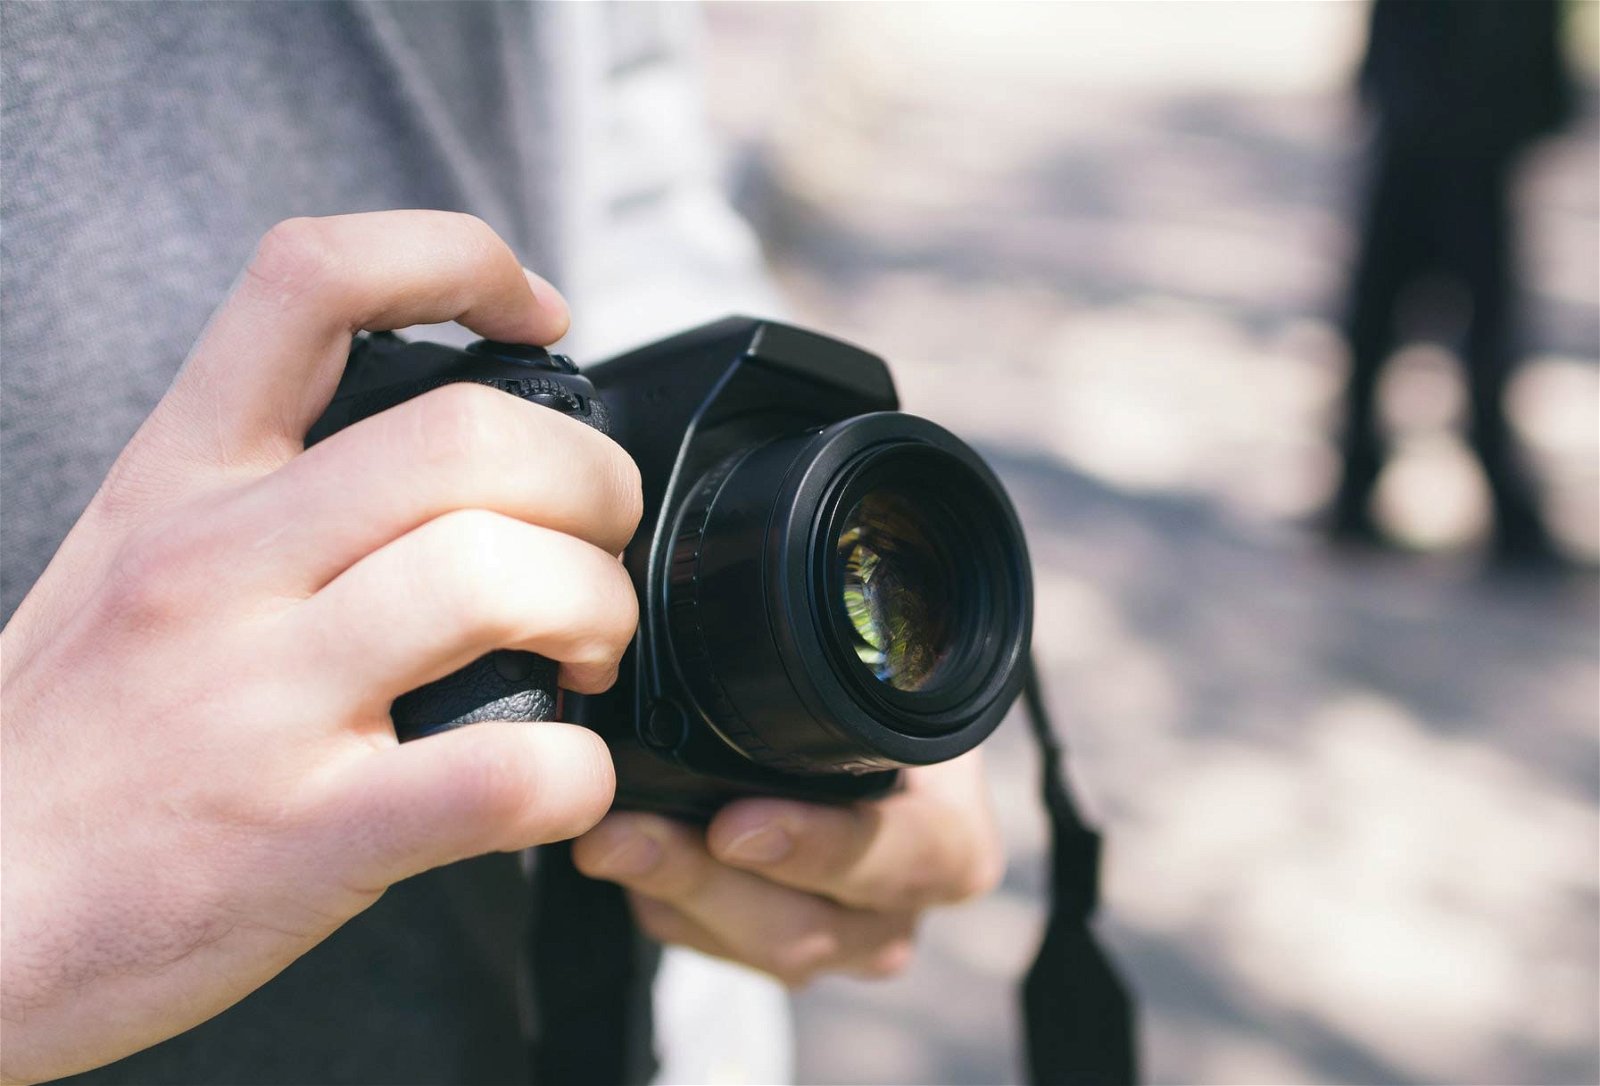 tips to steadily hold your camera.